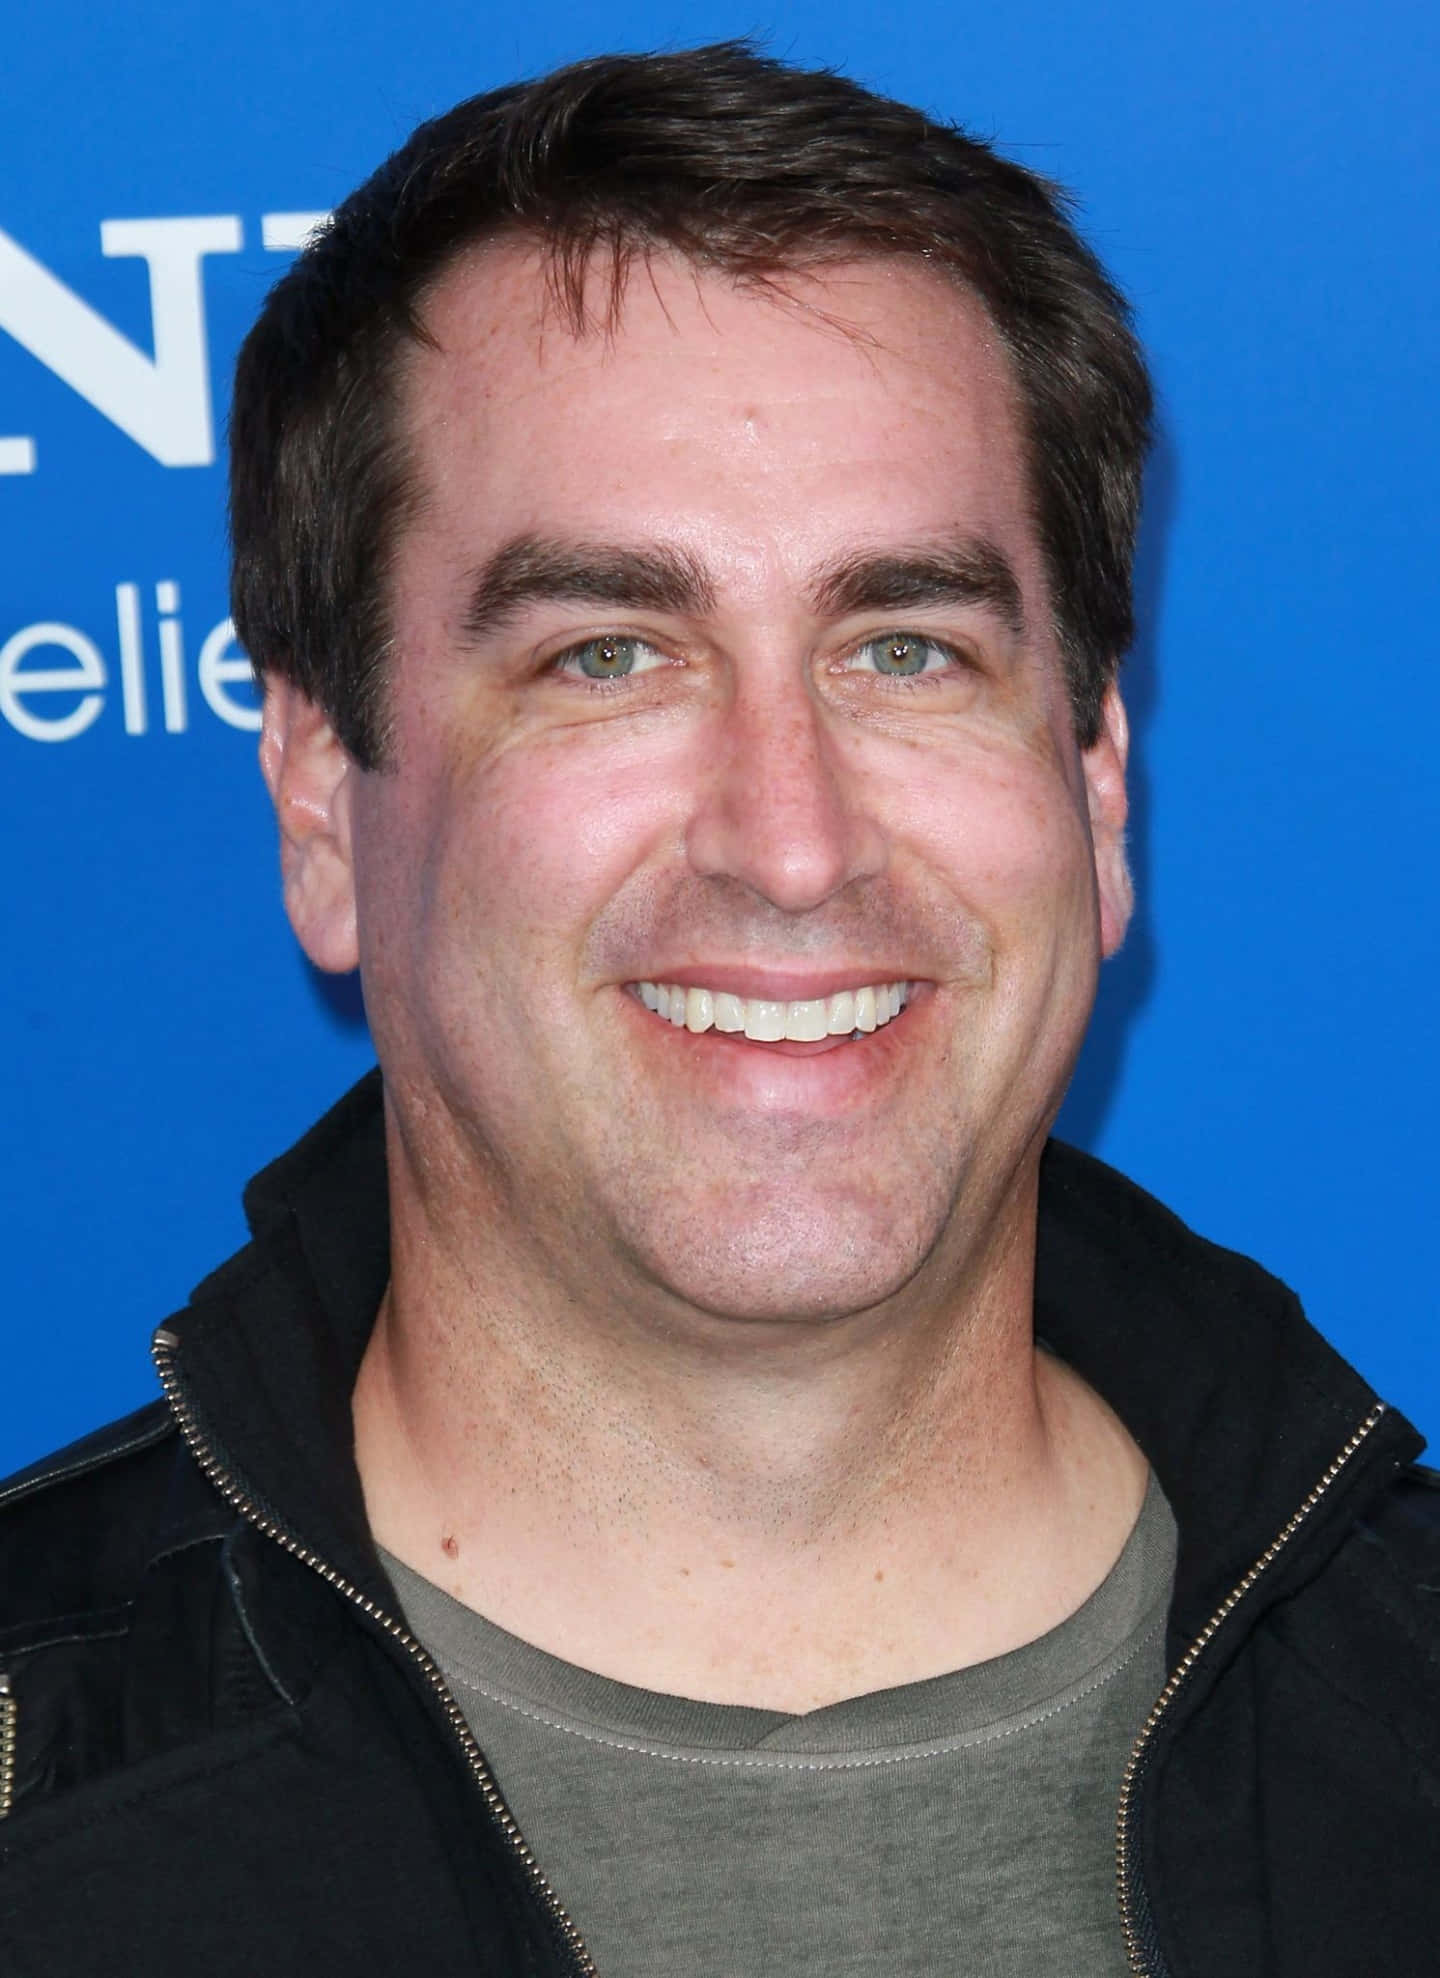 Rob Riggle in character as Lt. Col. Nick "Goose" Bradshaw from Top Gun Wallpaper